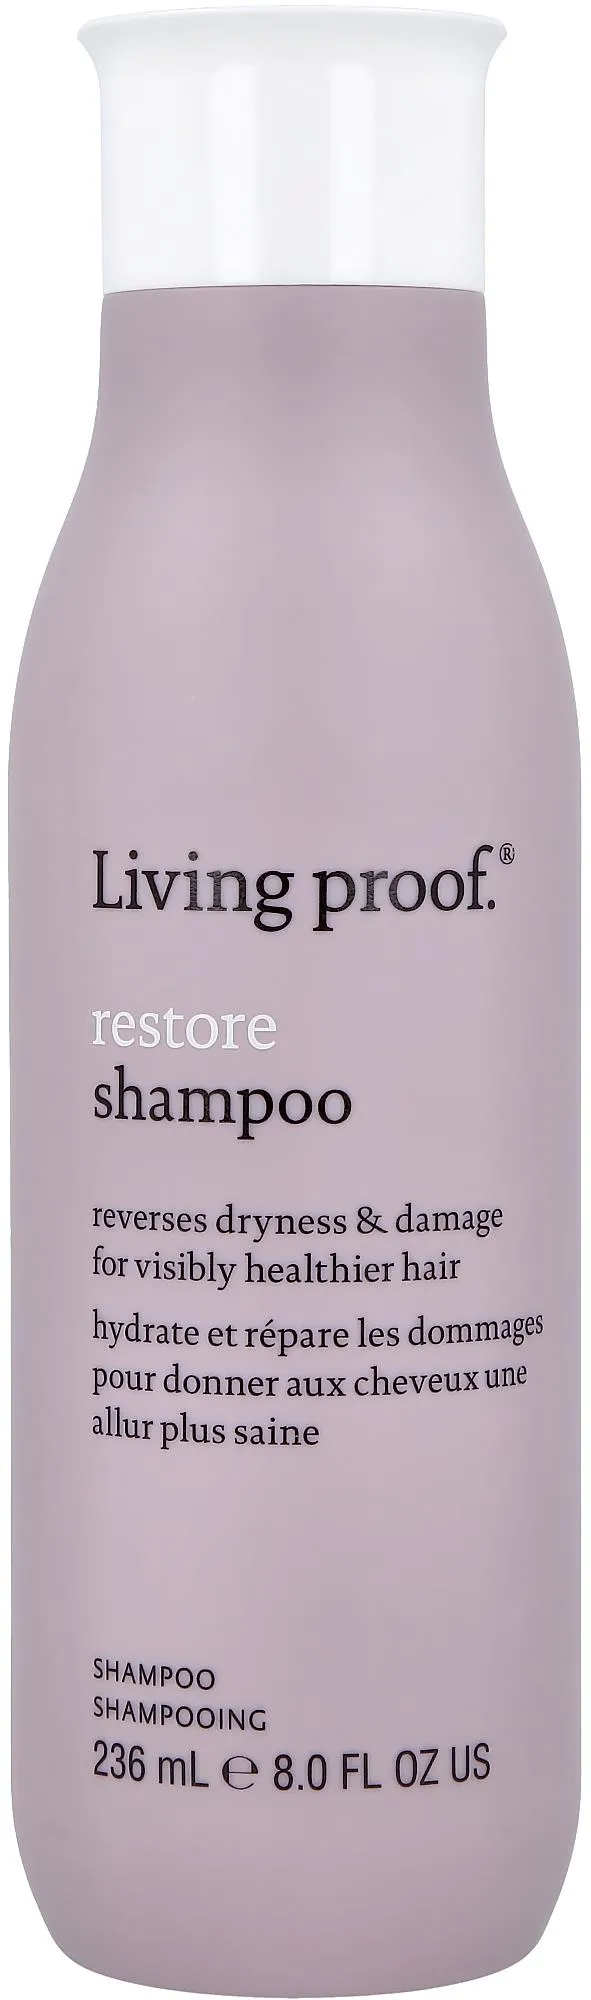 Living Proof Restore Shampoo and Conditioner, Streamlined Restoration for Your Tresses